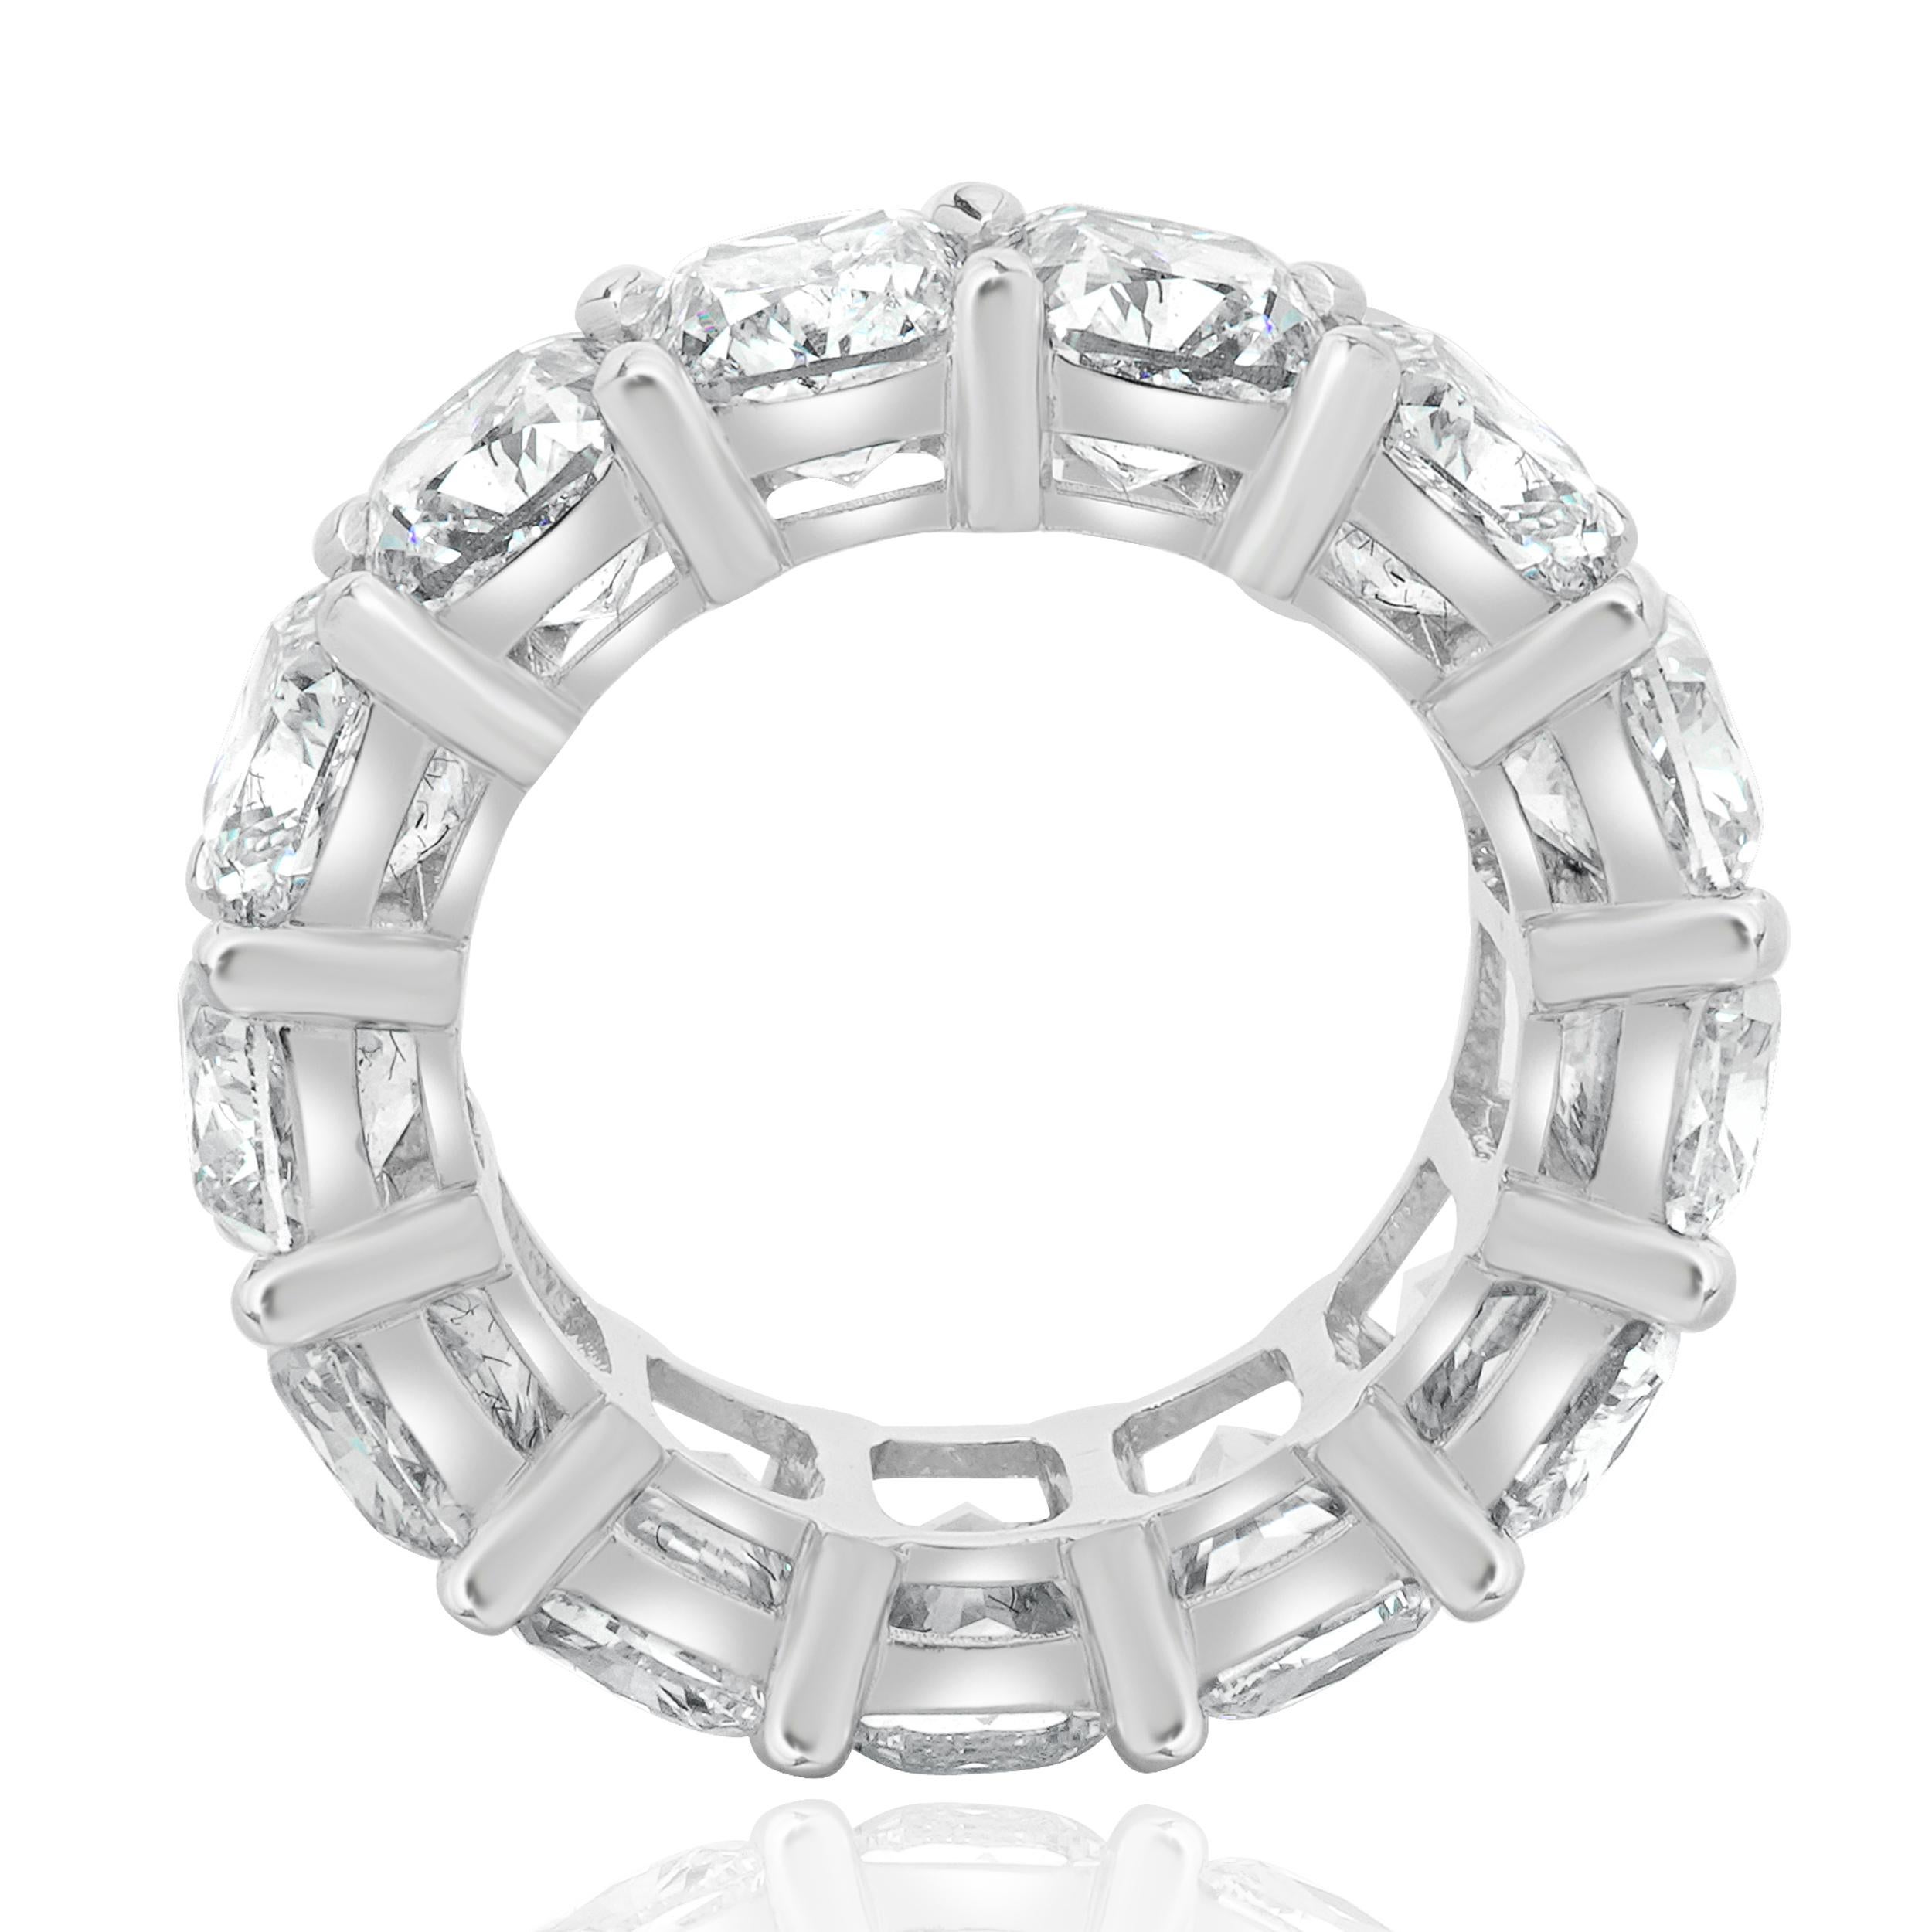 Platinum Cushion Cut Diamond Eternity Band In Excellent Condition For Sale In Scottsdale, AZ